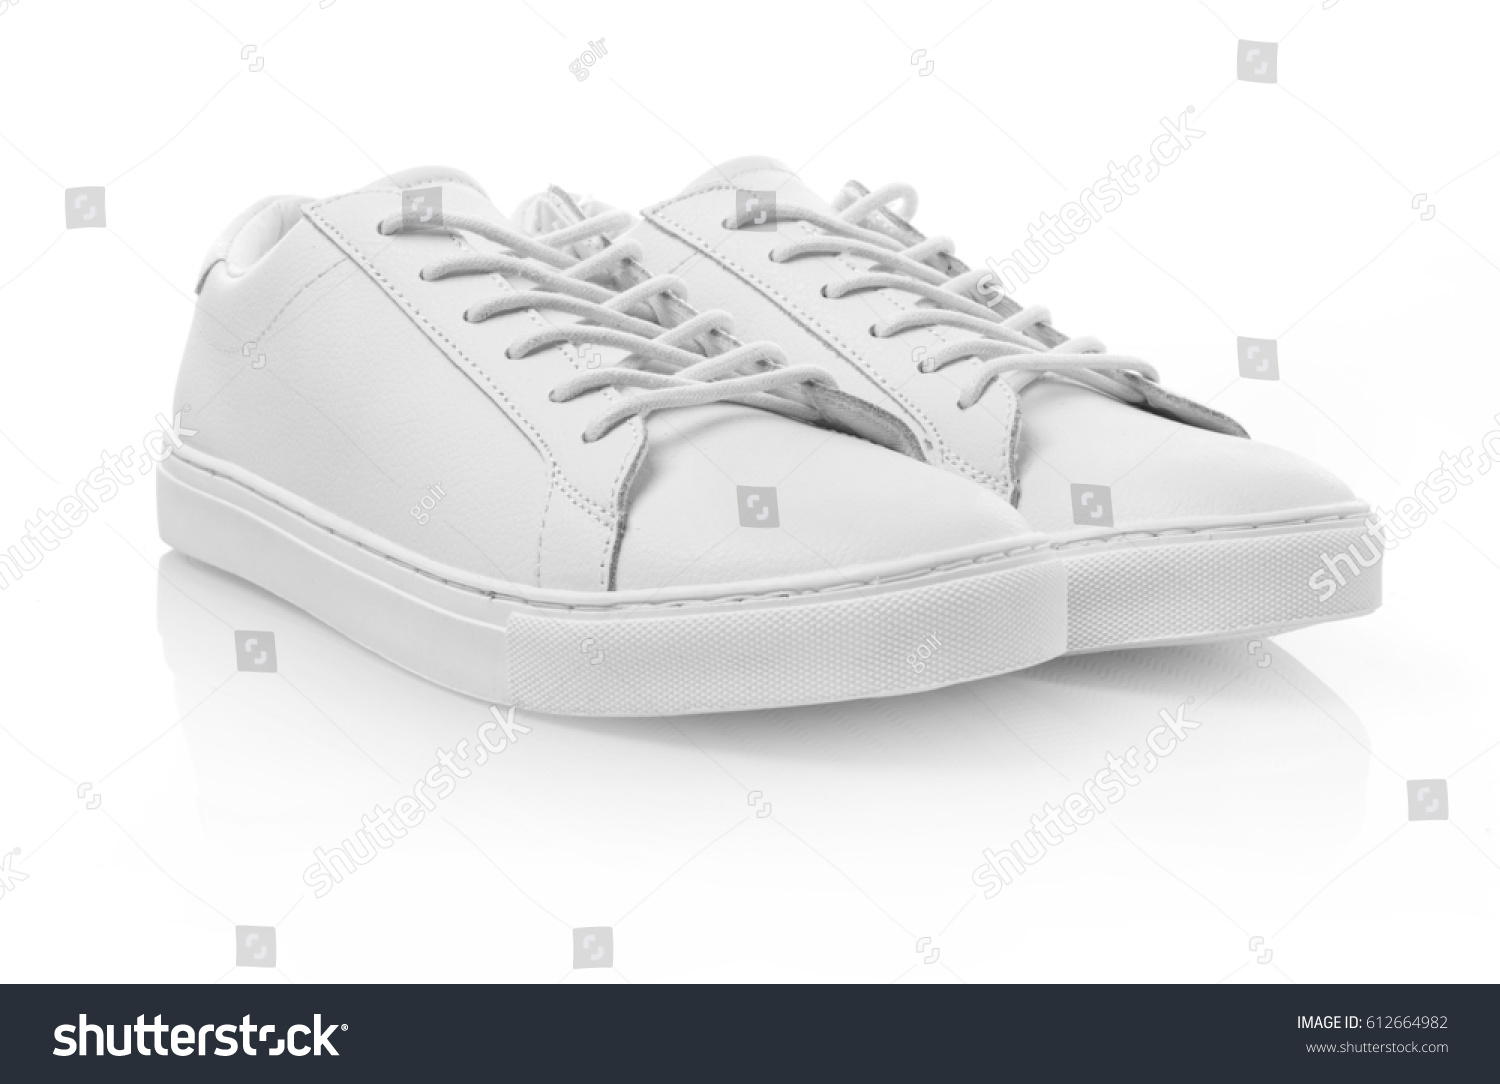 White Shoes Stock Photo 612664982 | Shutterstock